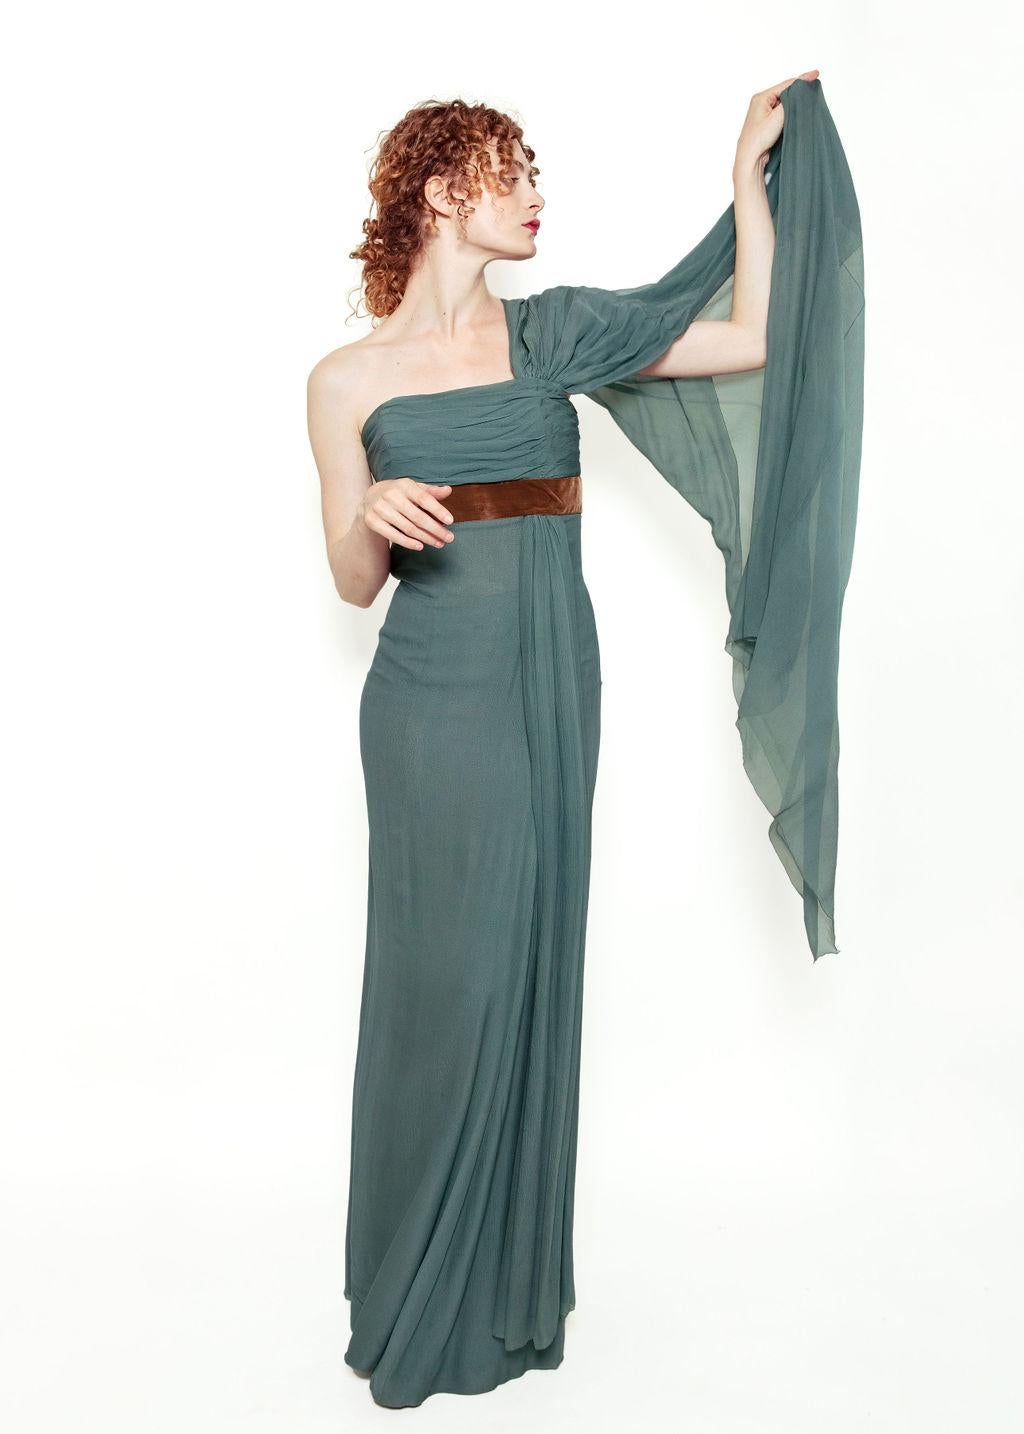 Women's Custom Couture One Shoulder Chiffon Gown For Sale